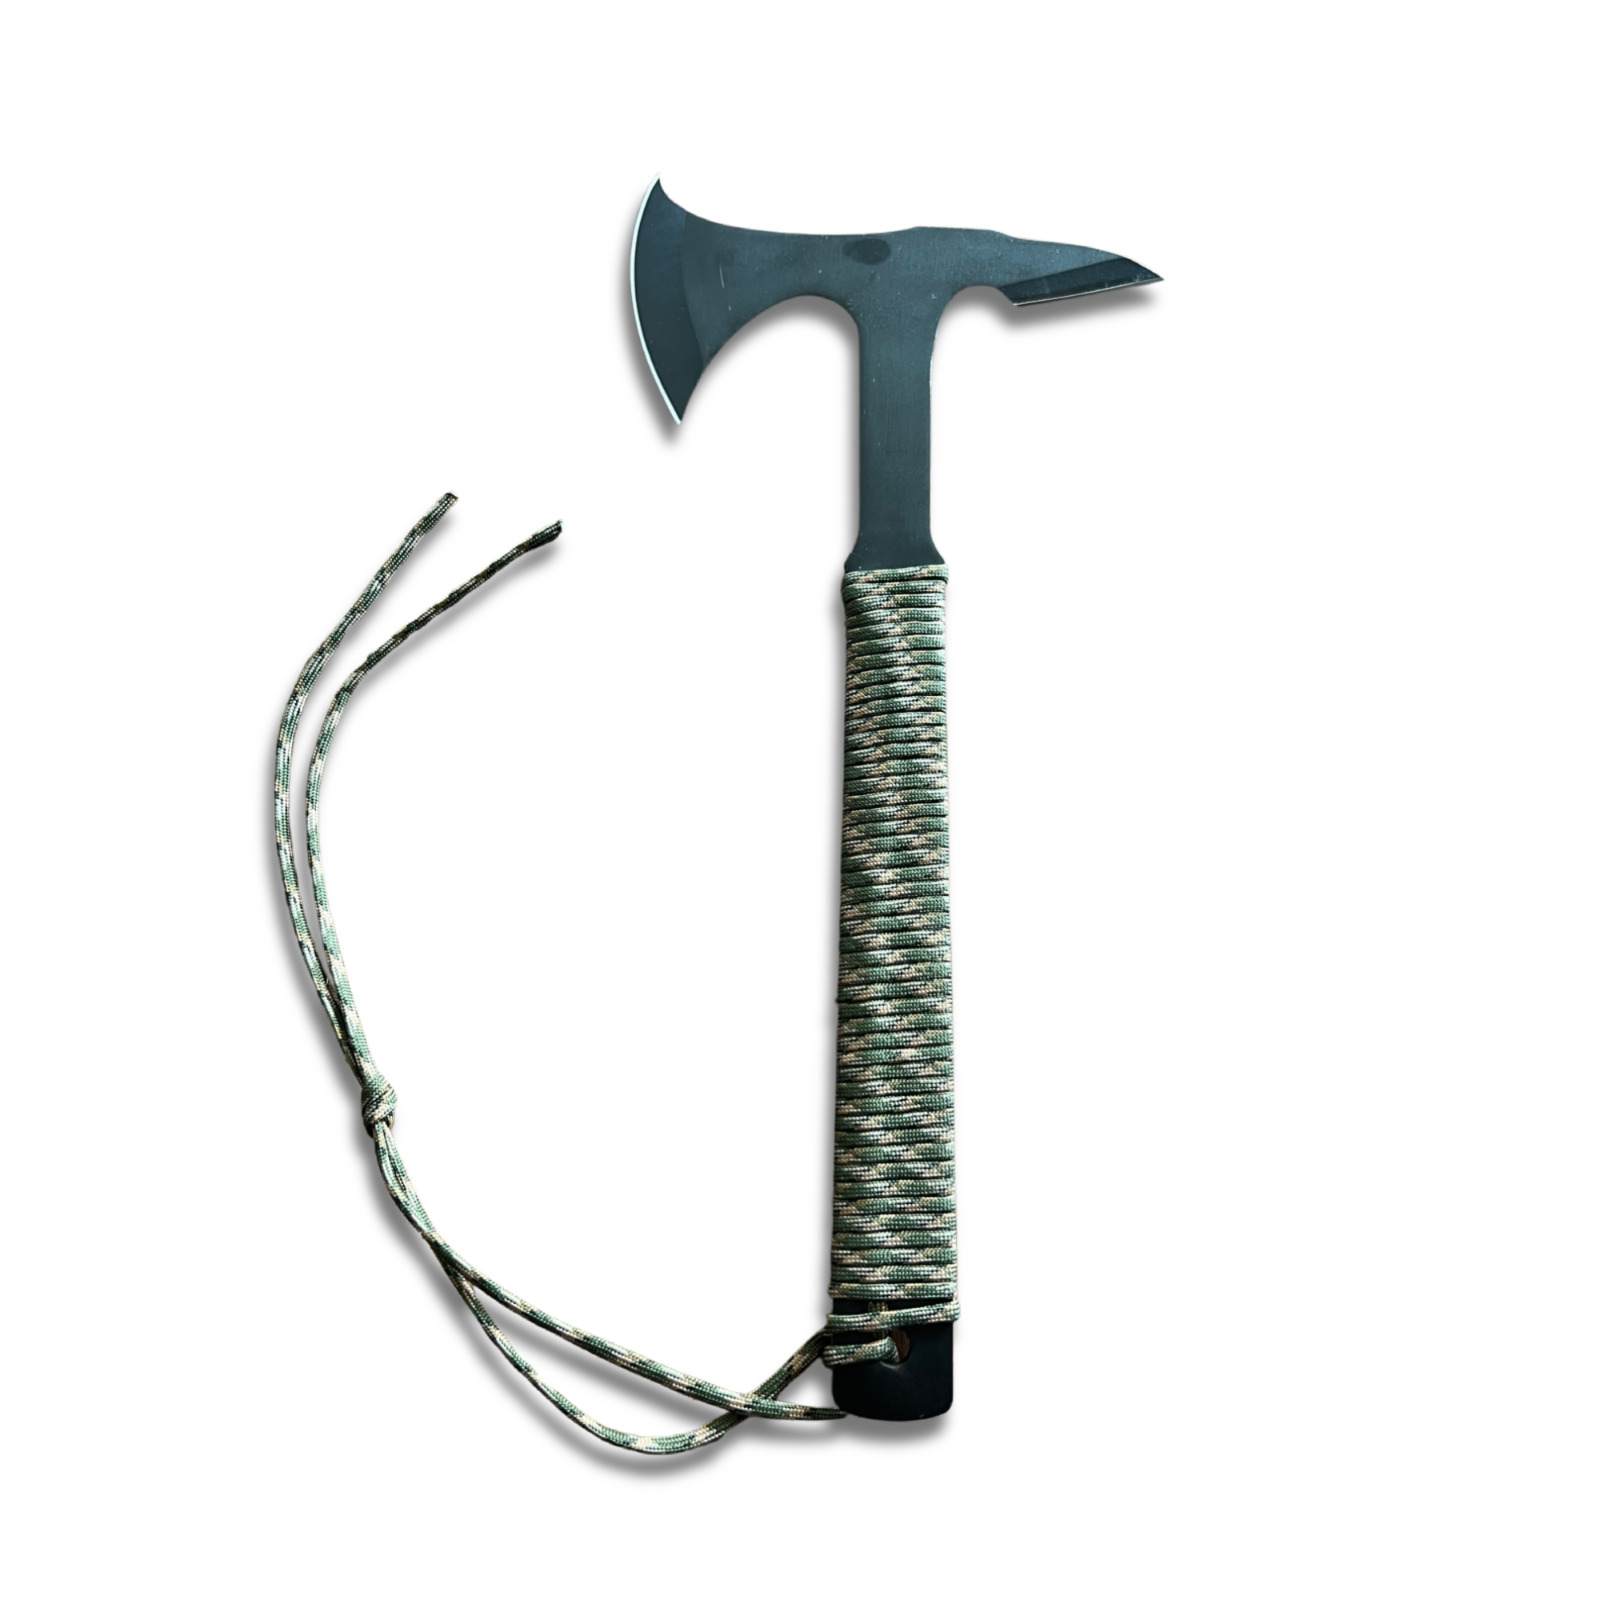 Tactical Tomahawk with Sheath